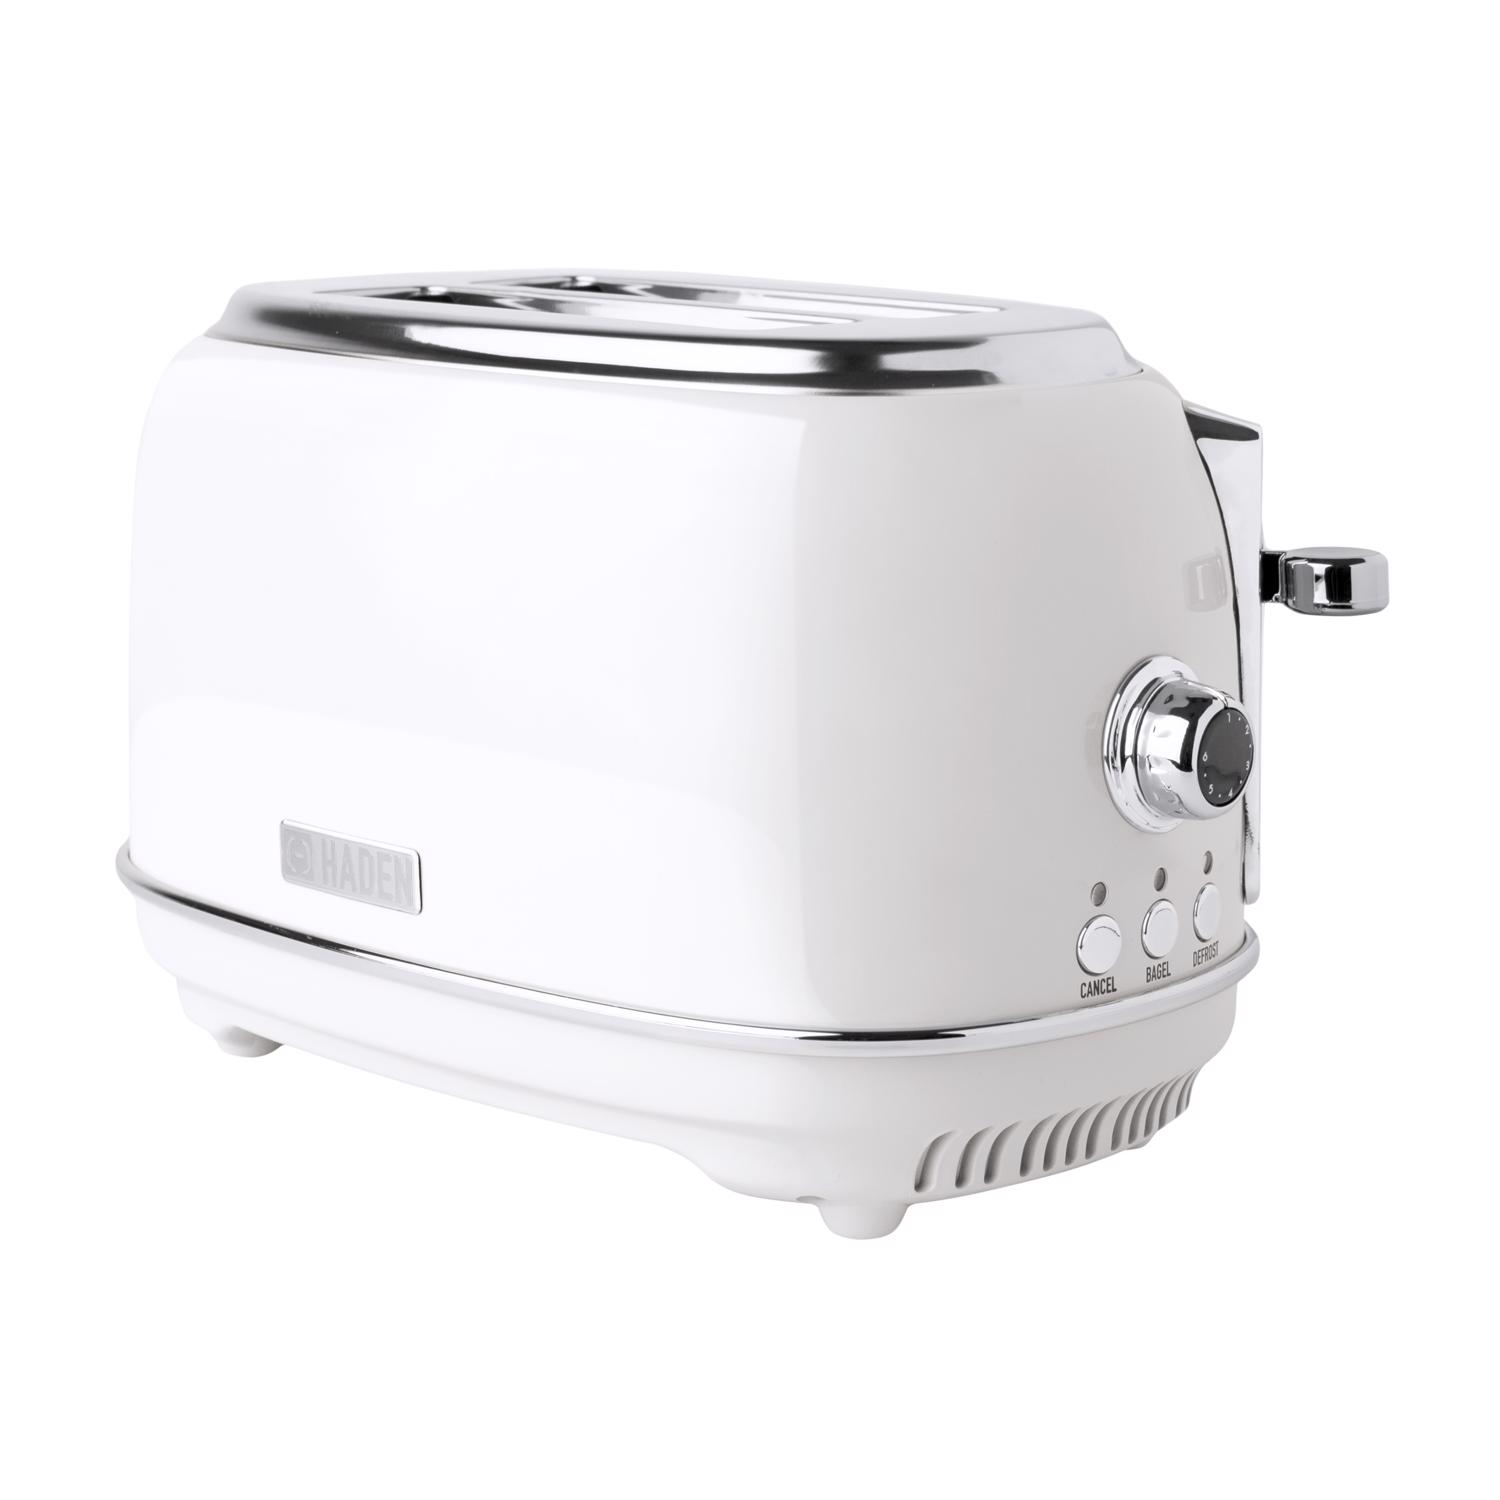 Photos - Toaster Haden Heritage Stainless Steel White 2 slot  8 in. H X 12 in. W X 8 